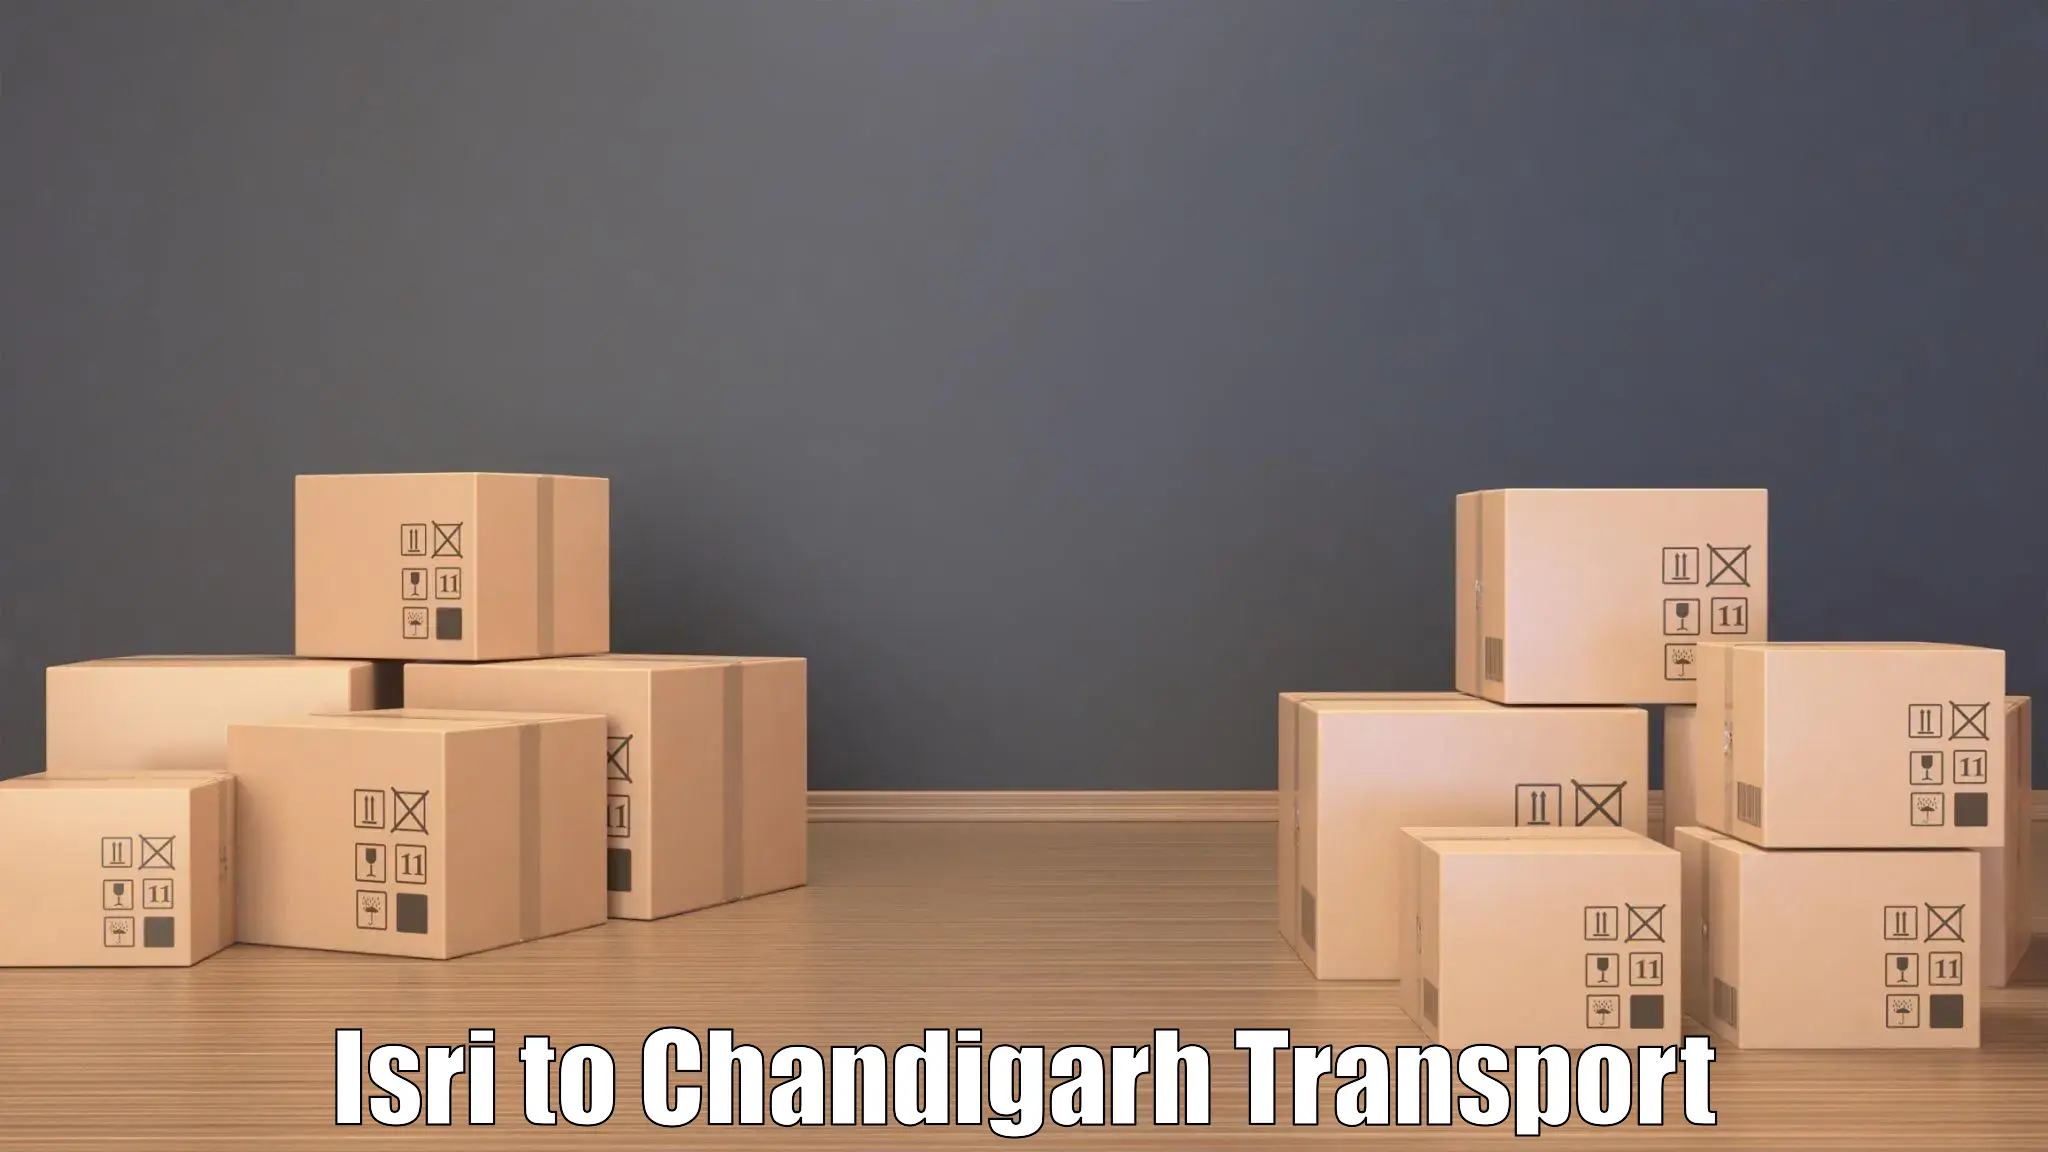 Two wheeler transport services Isri to Chandigarh